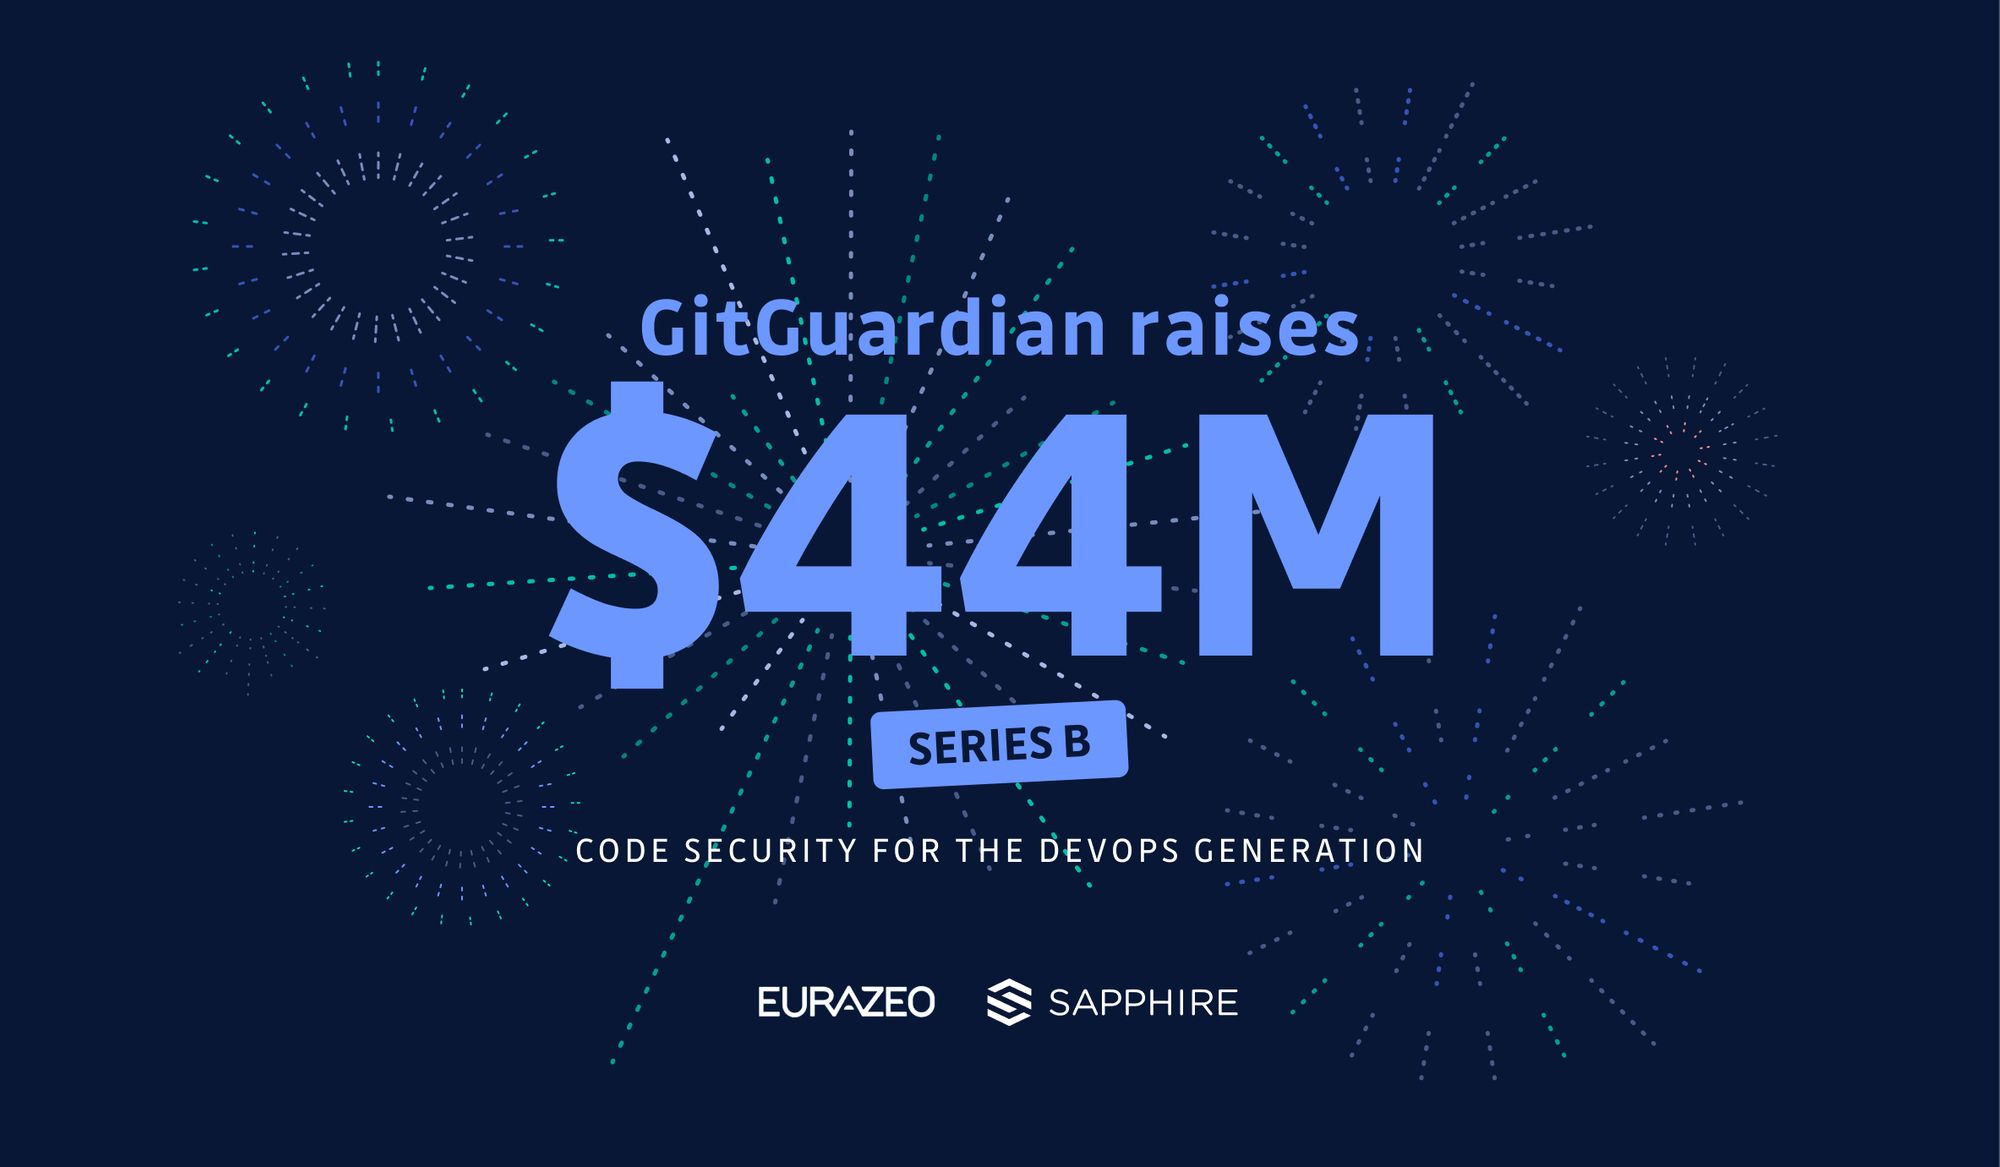 GitGuardian Closes $44 Million Series B To Grow And Deliver An Enterprise-Grade Code Security Platform To Enable DevSecOps